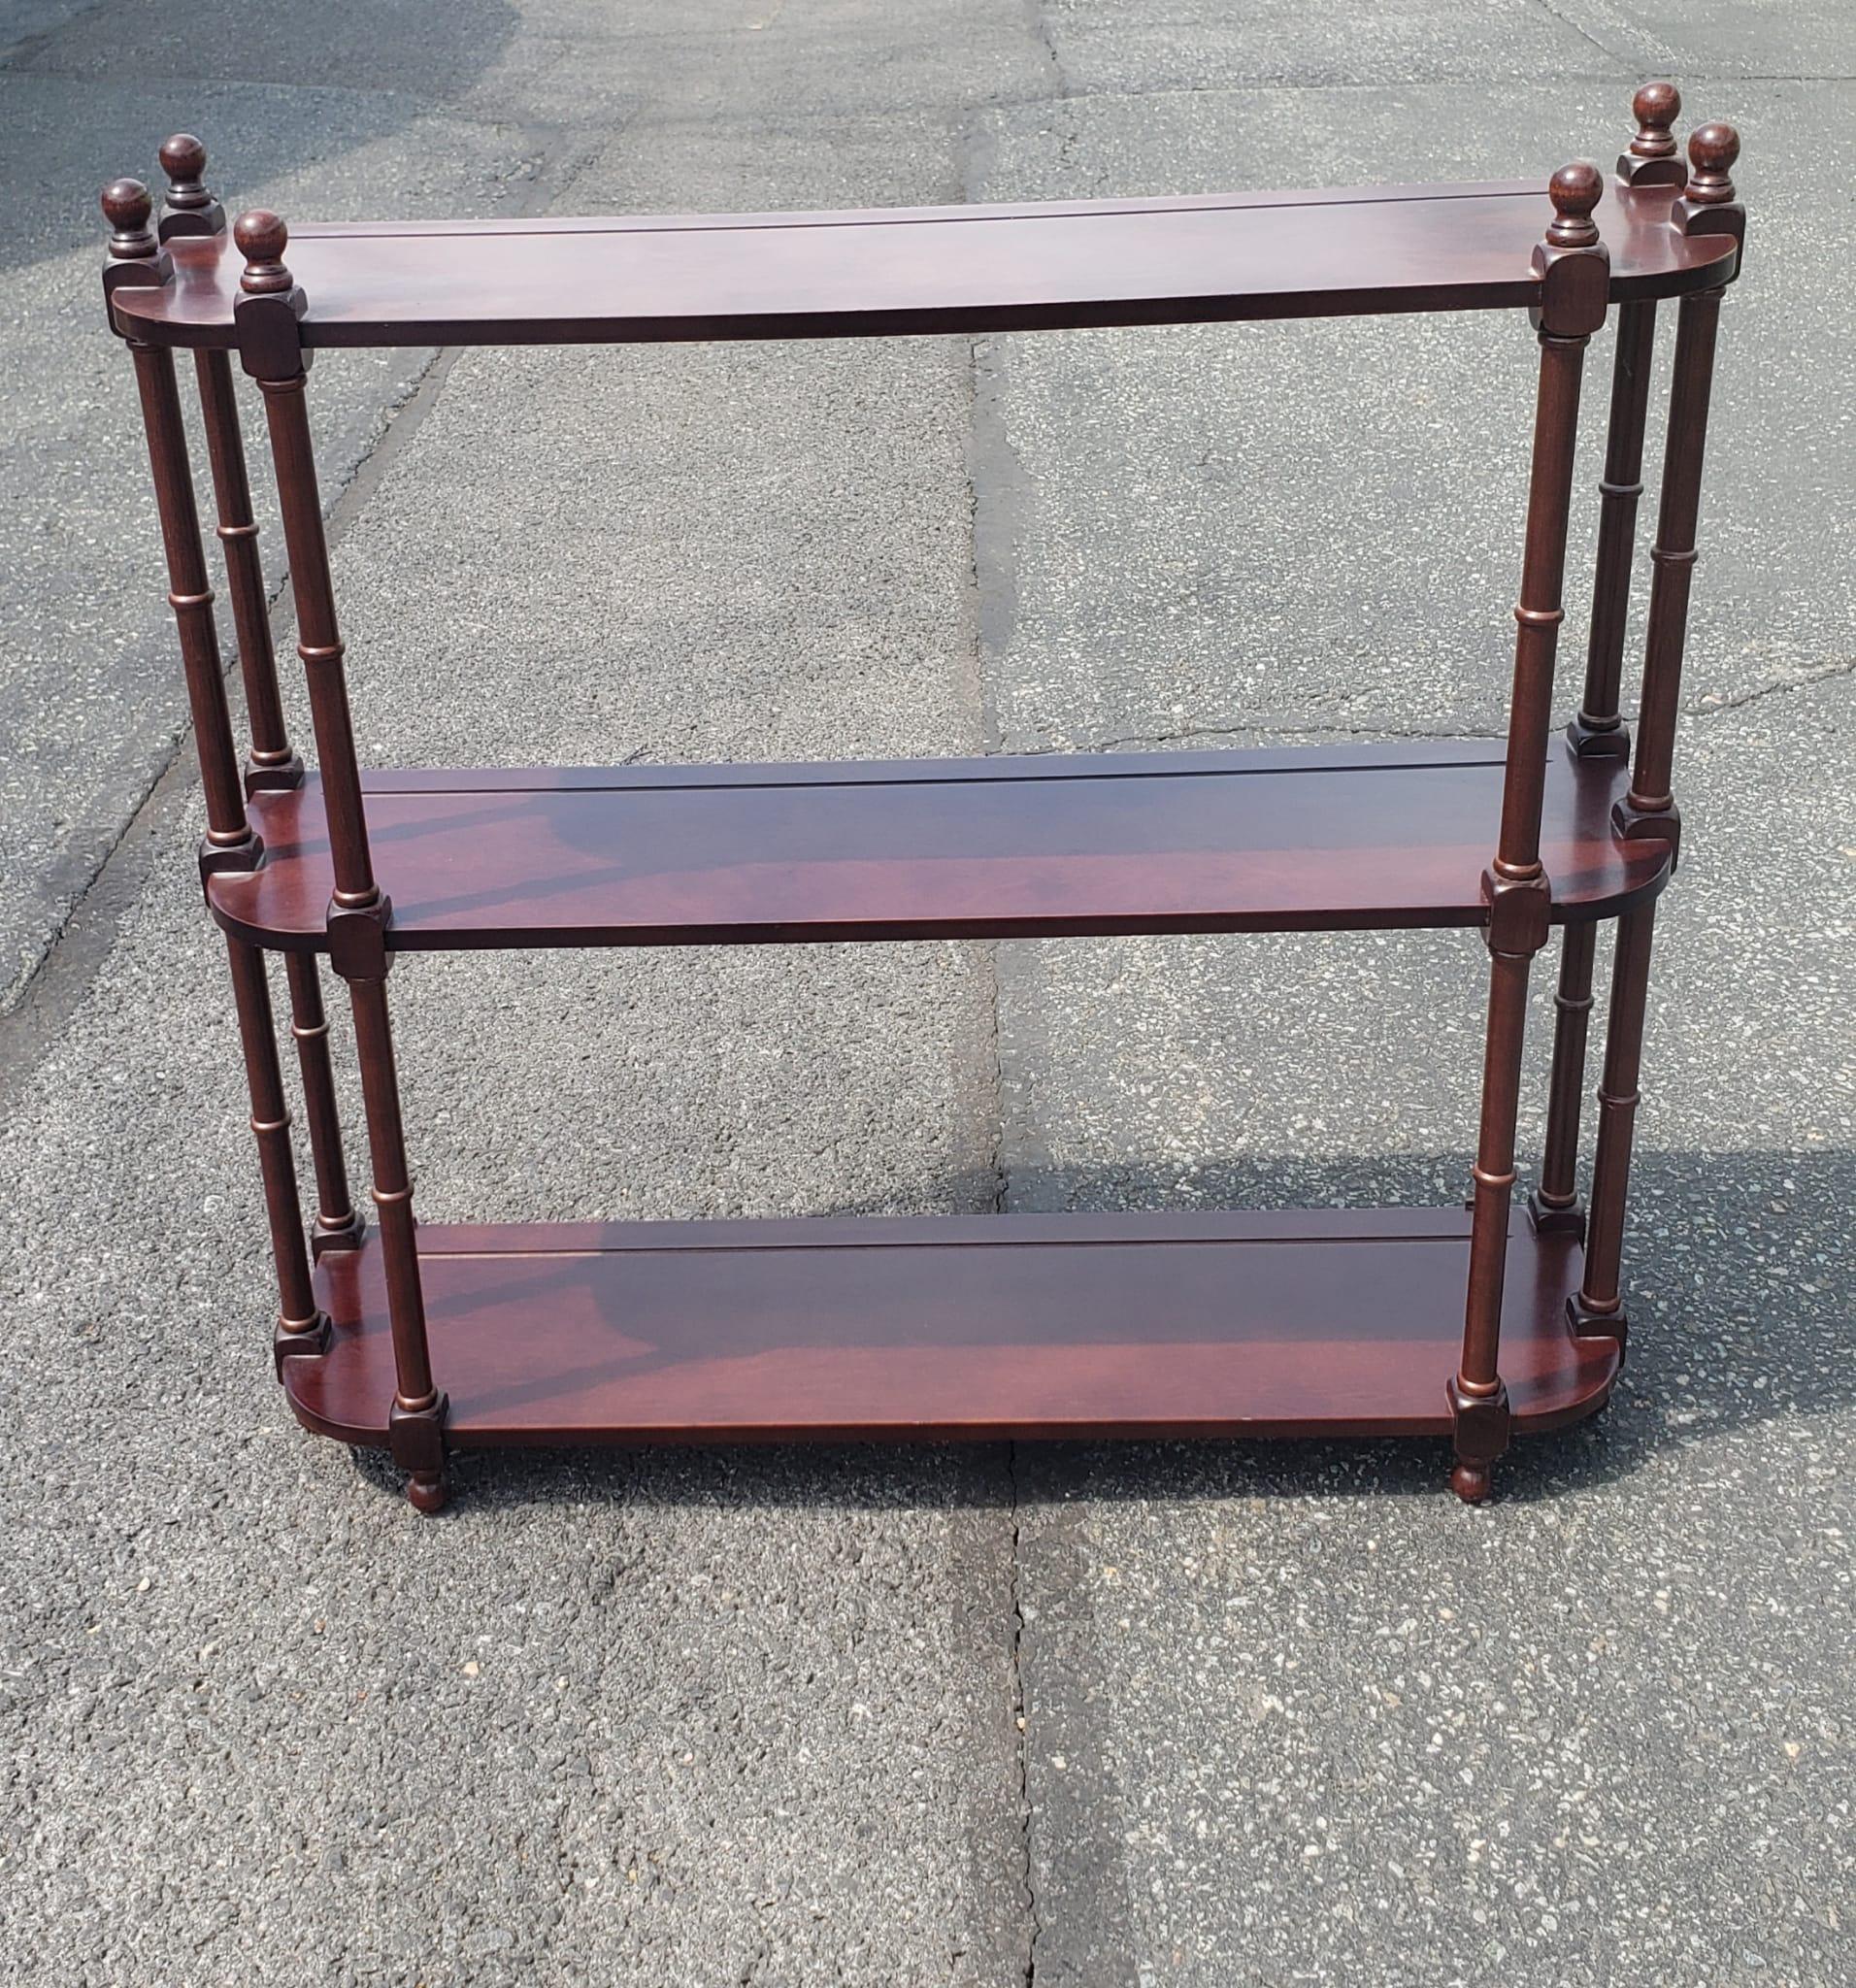 Late 20th Century three tier Mahogany finish hanging wall shelves in very good vintage condition. Measures 31.75